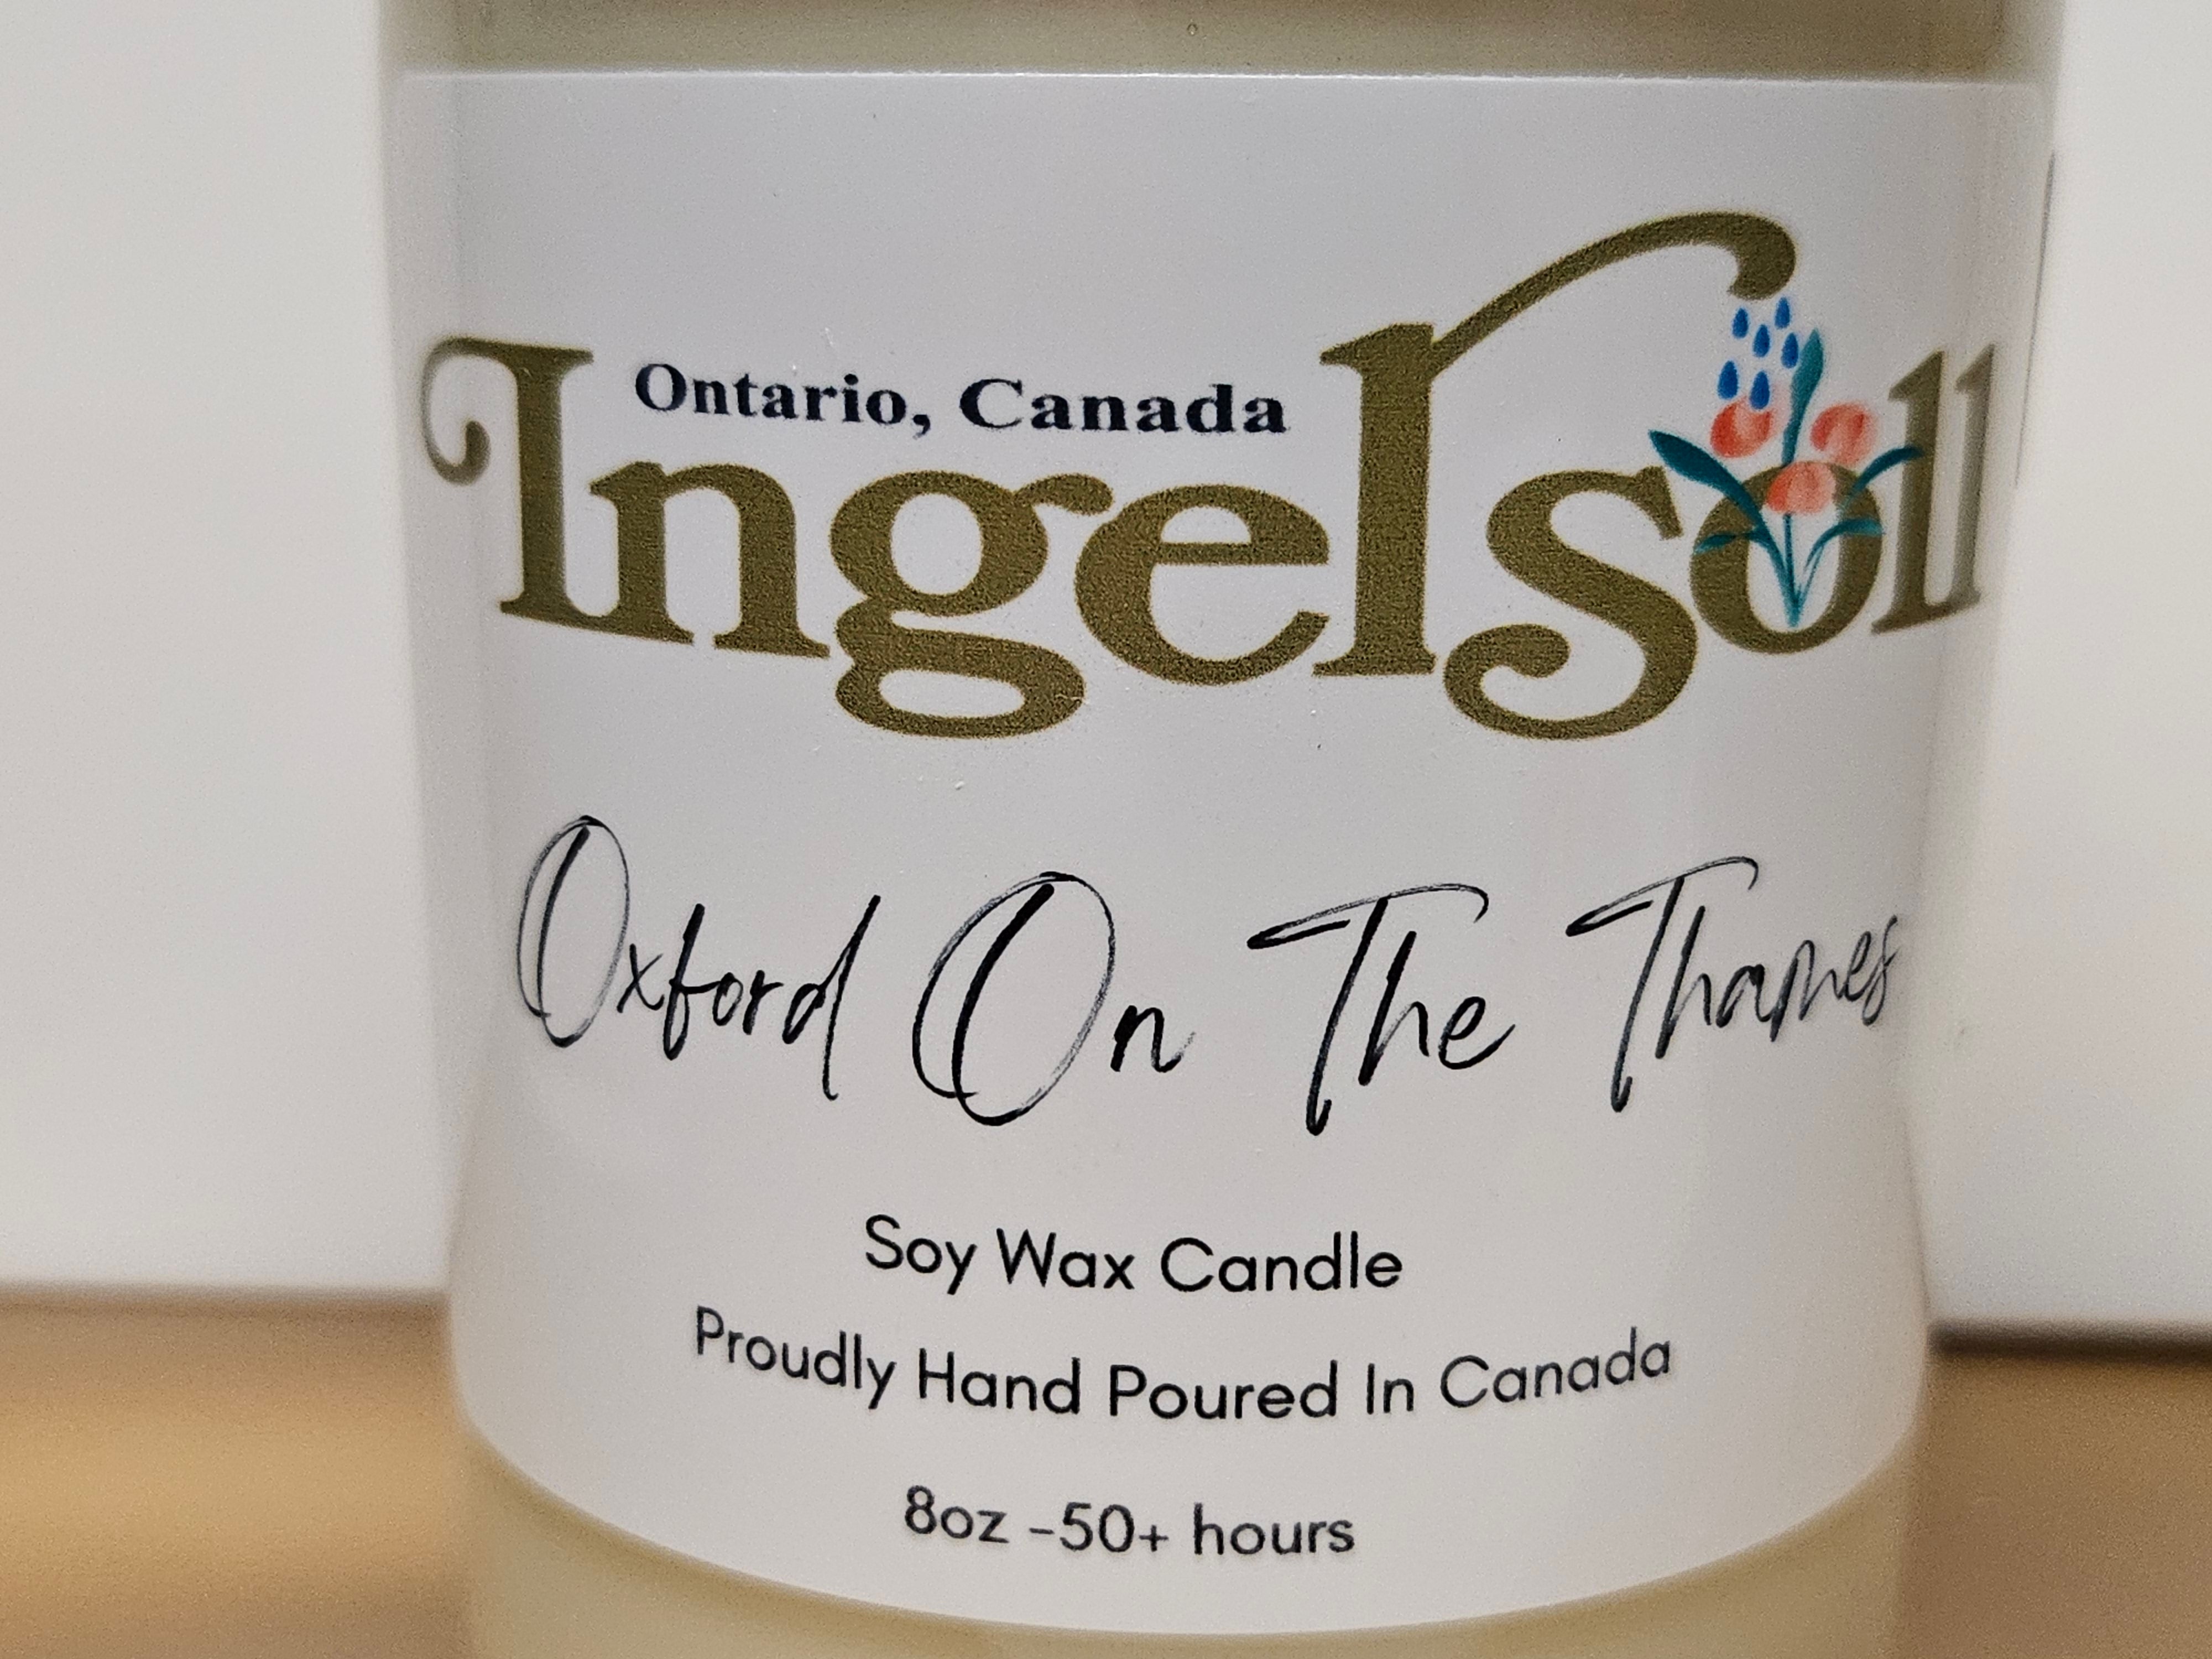 Ingersoll Soy Wax Candle - Oxford on the Thames - 8oz